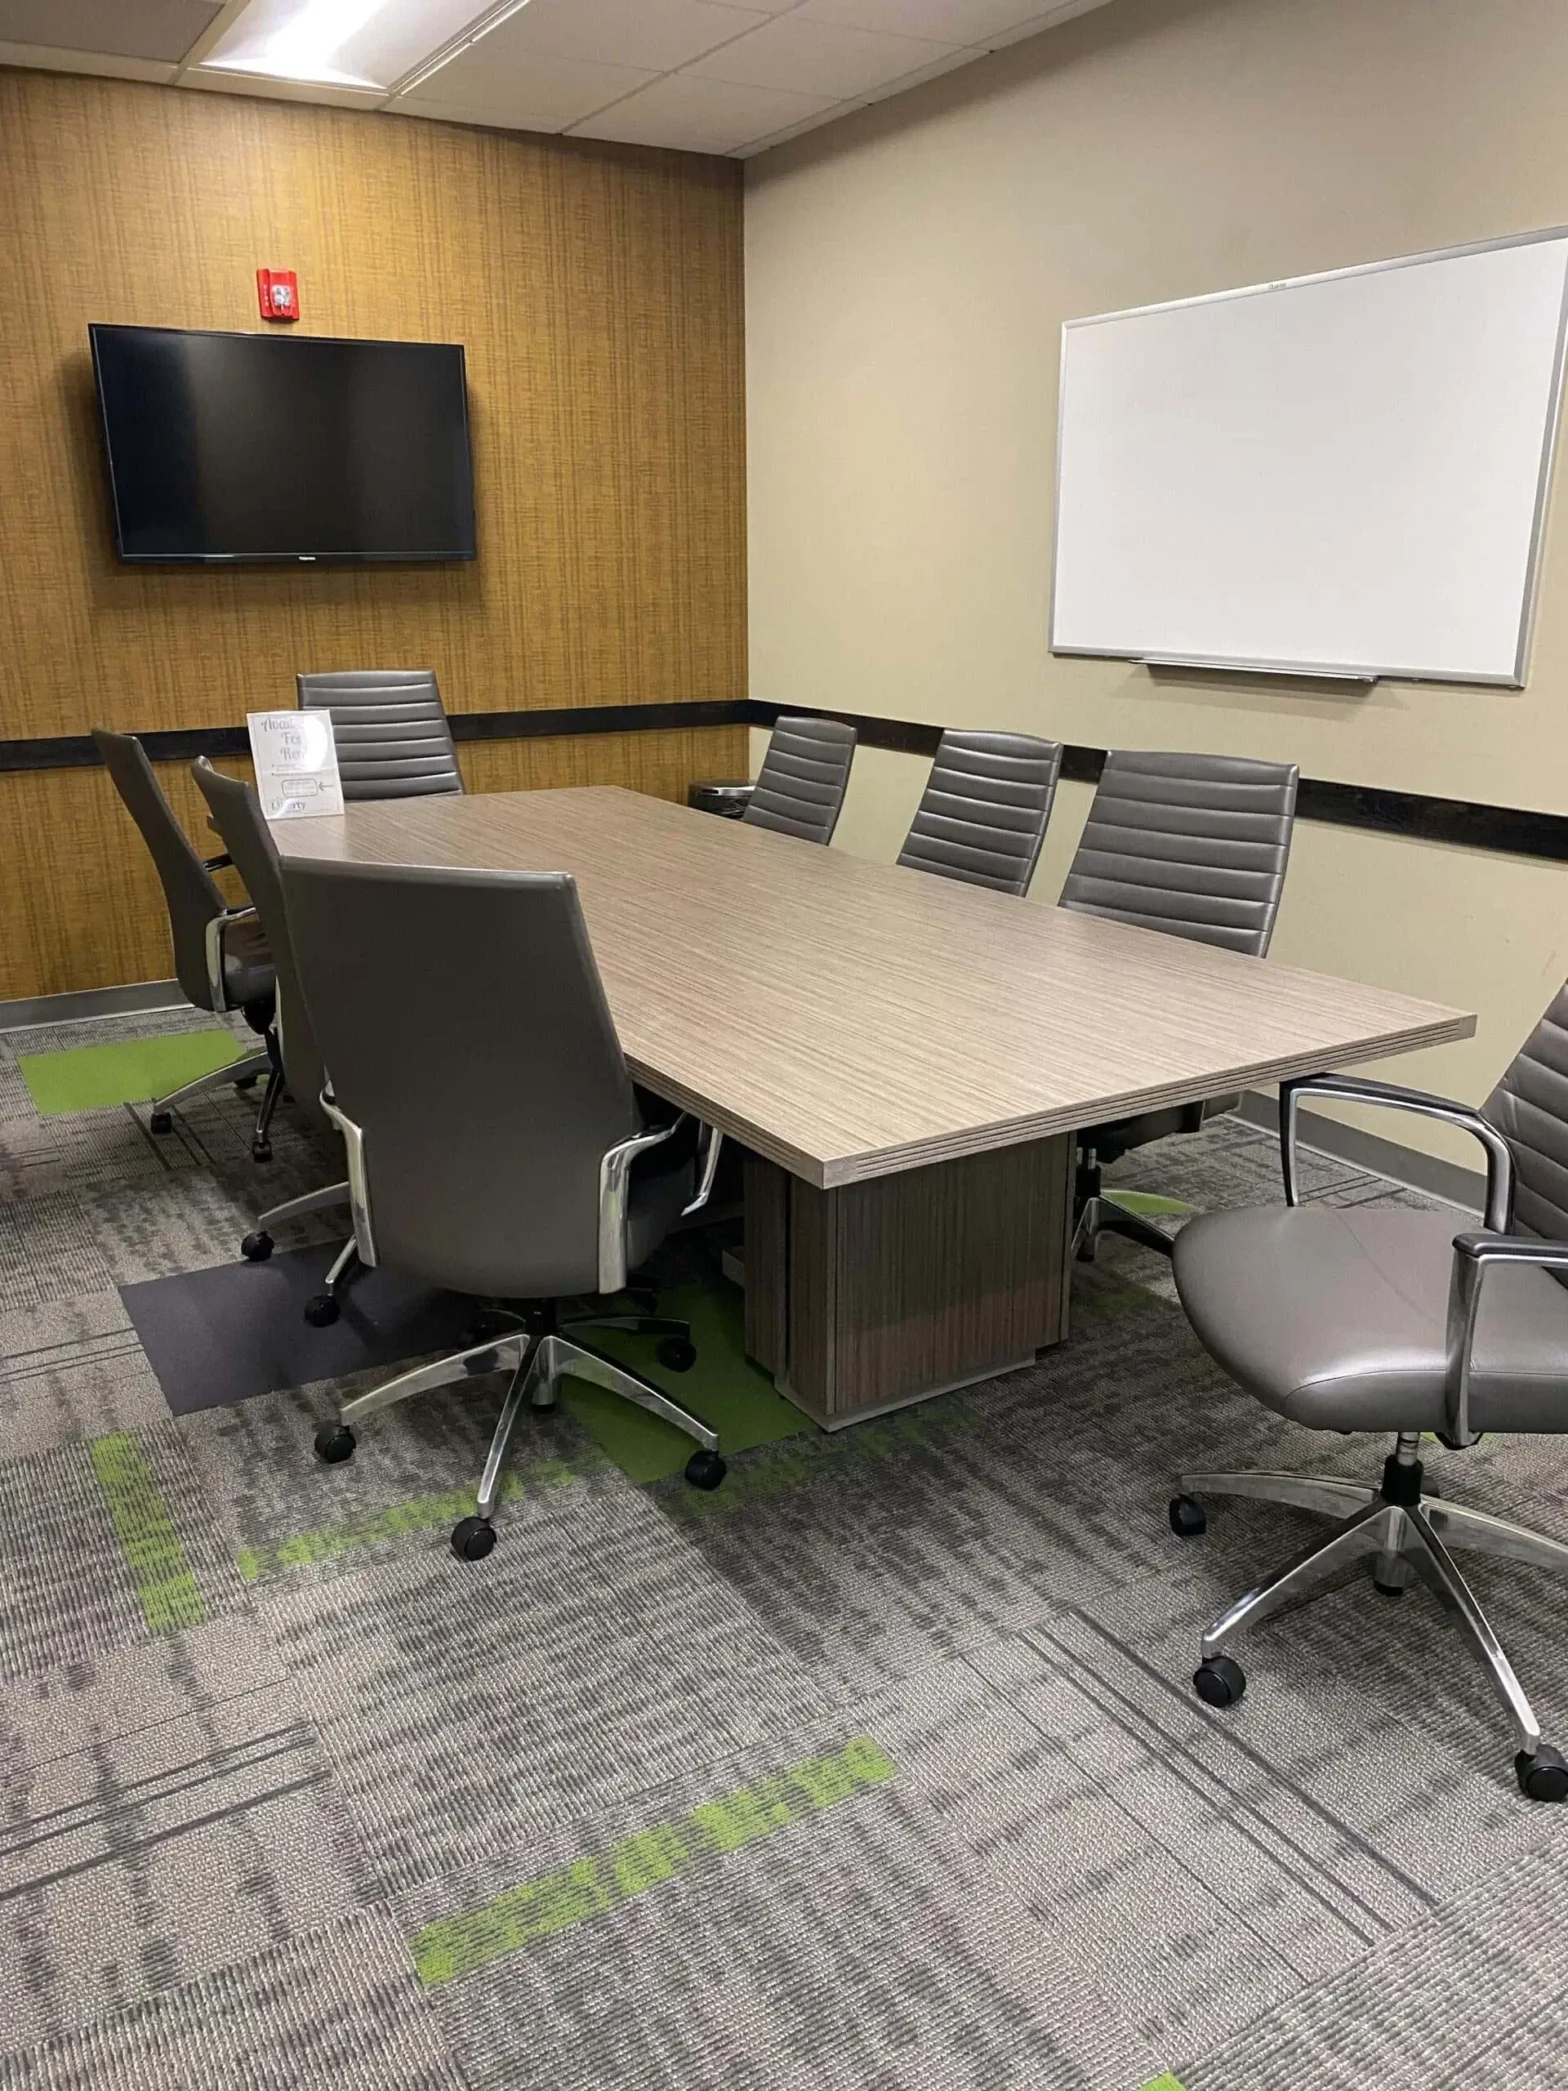 Shared Office Space Parsippany Solutions, Collaborative work environment for productivity and growth. Schedule Tour Now.!